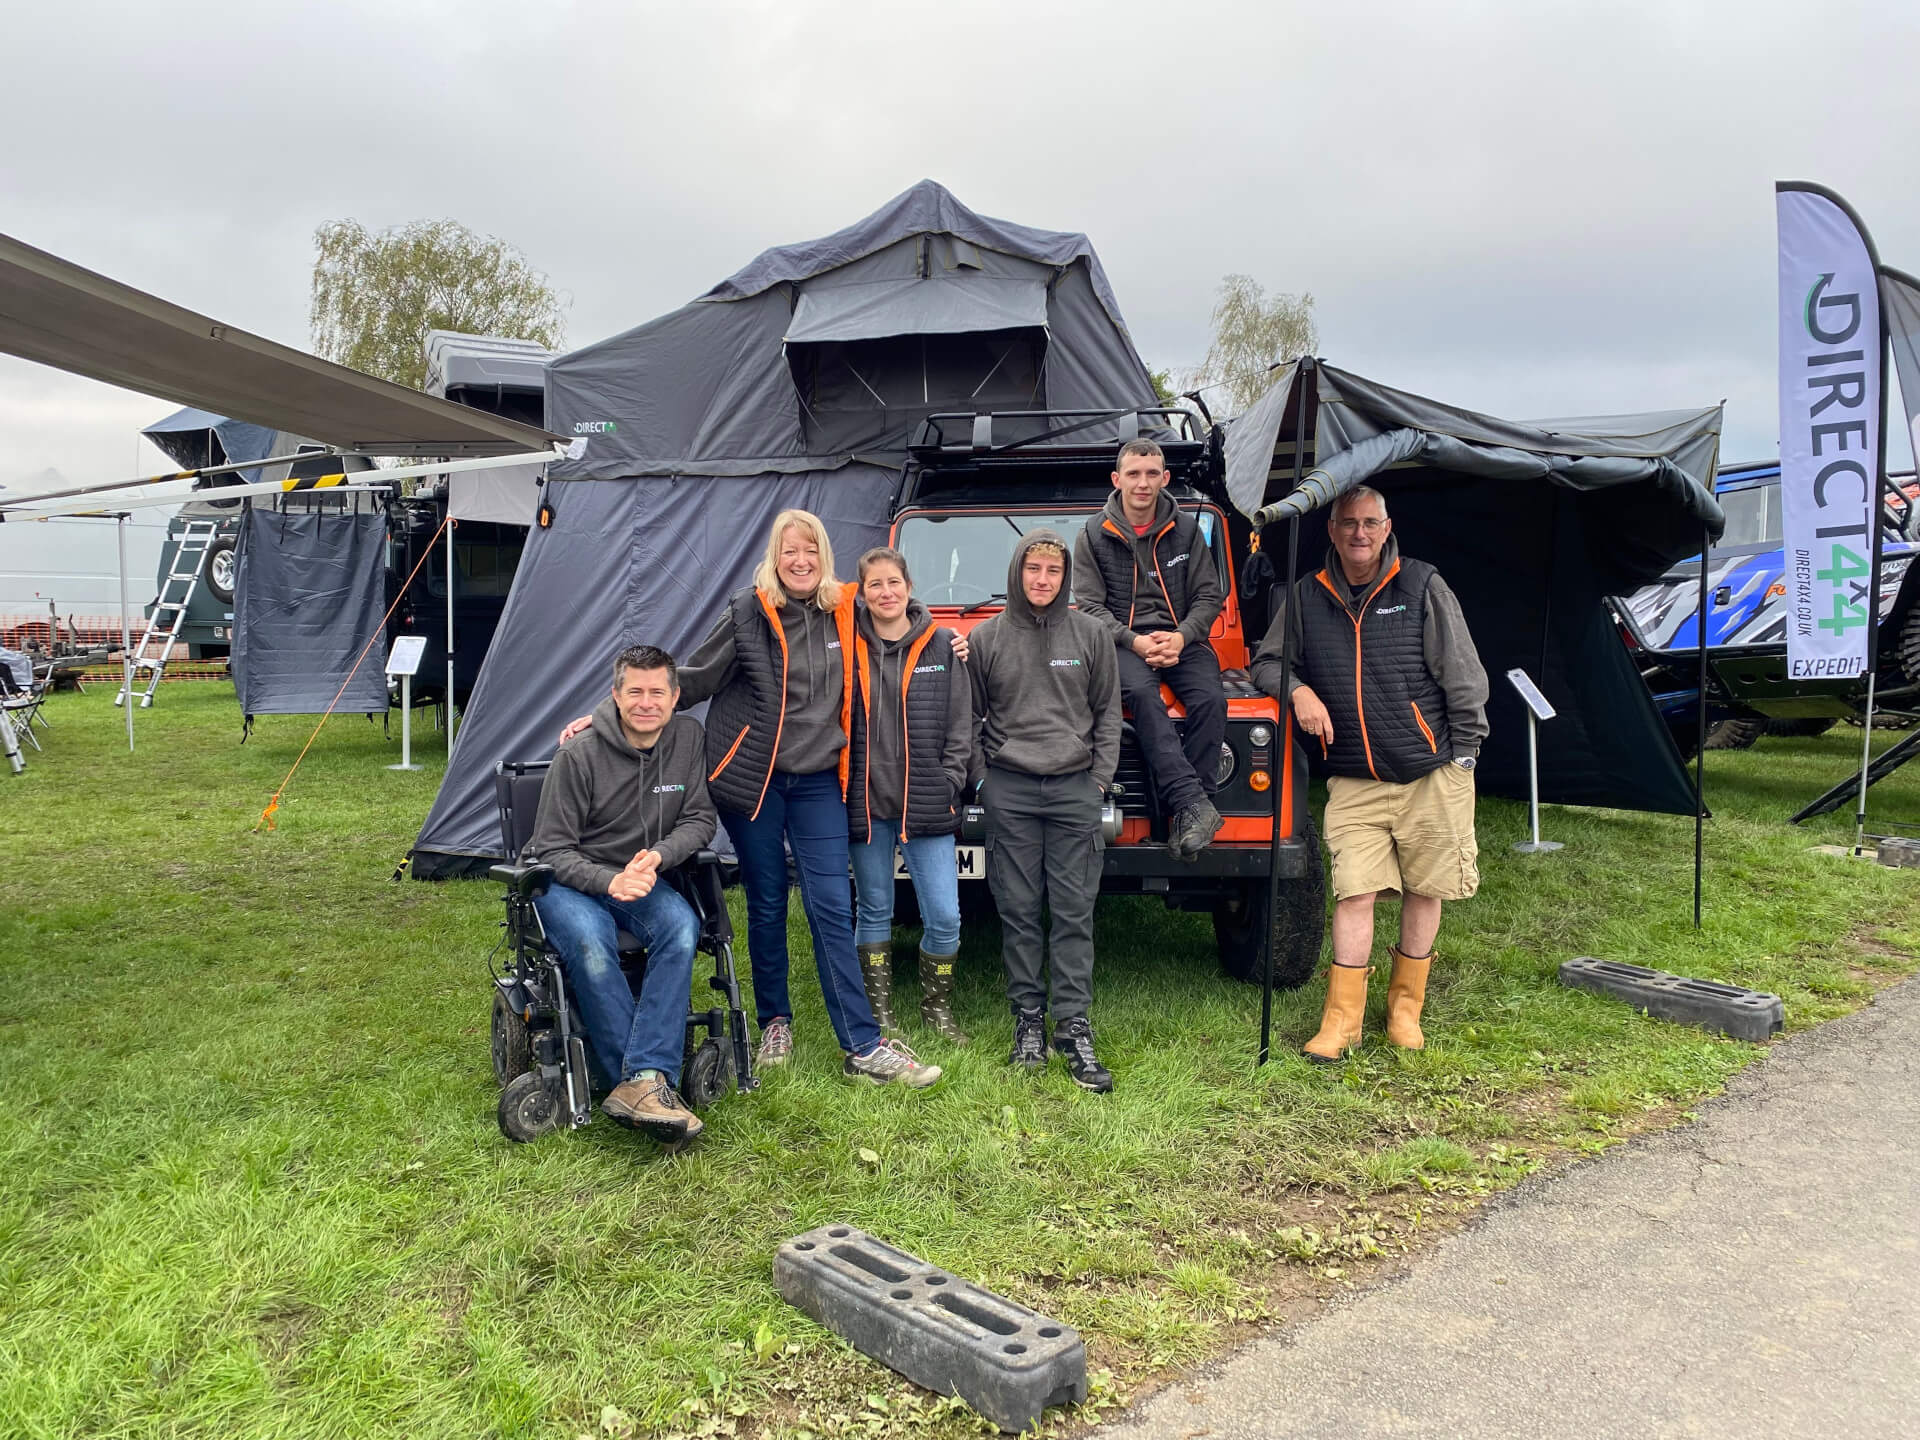 Photo of the Direct4x4 team at a showground in front of an organe Land Rover Defender with a camping tent.